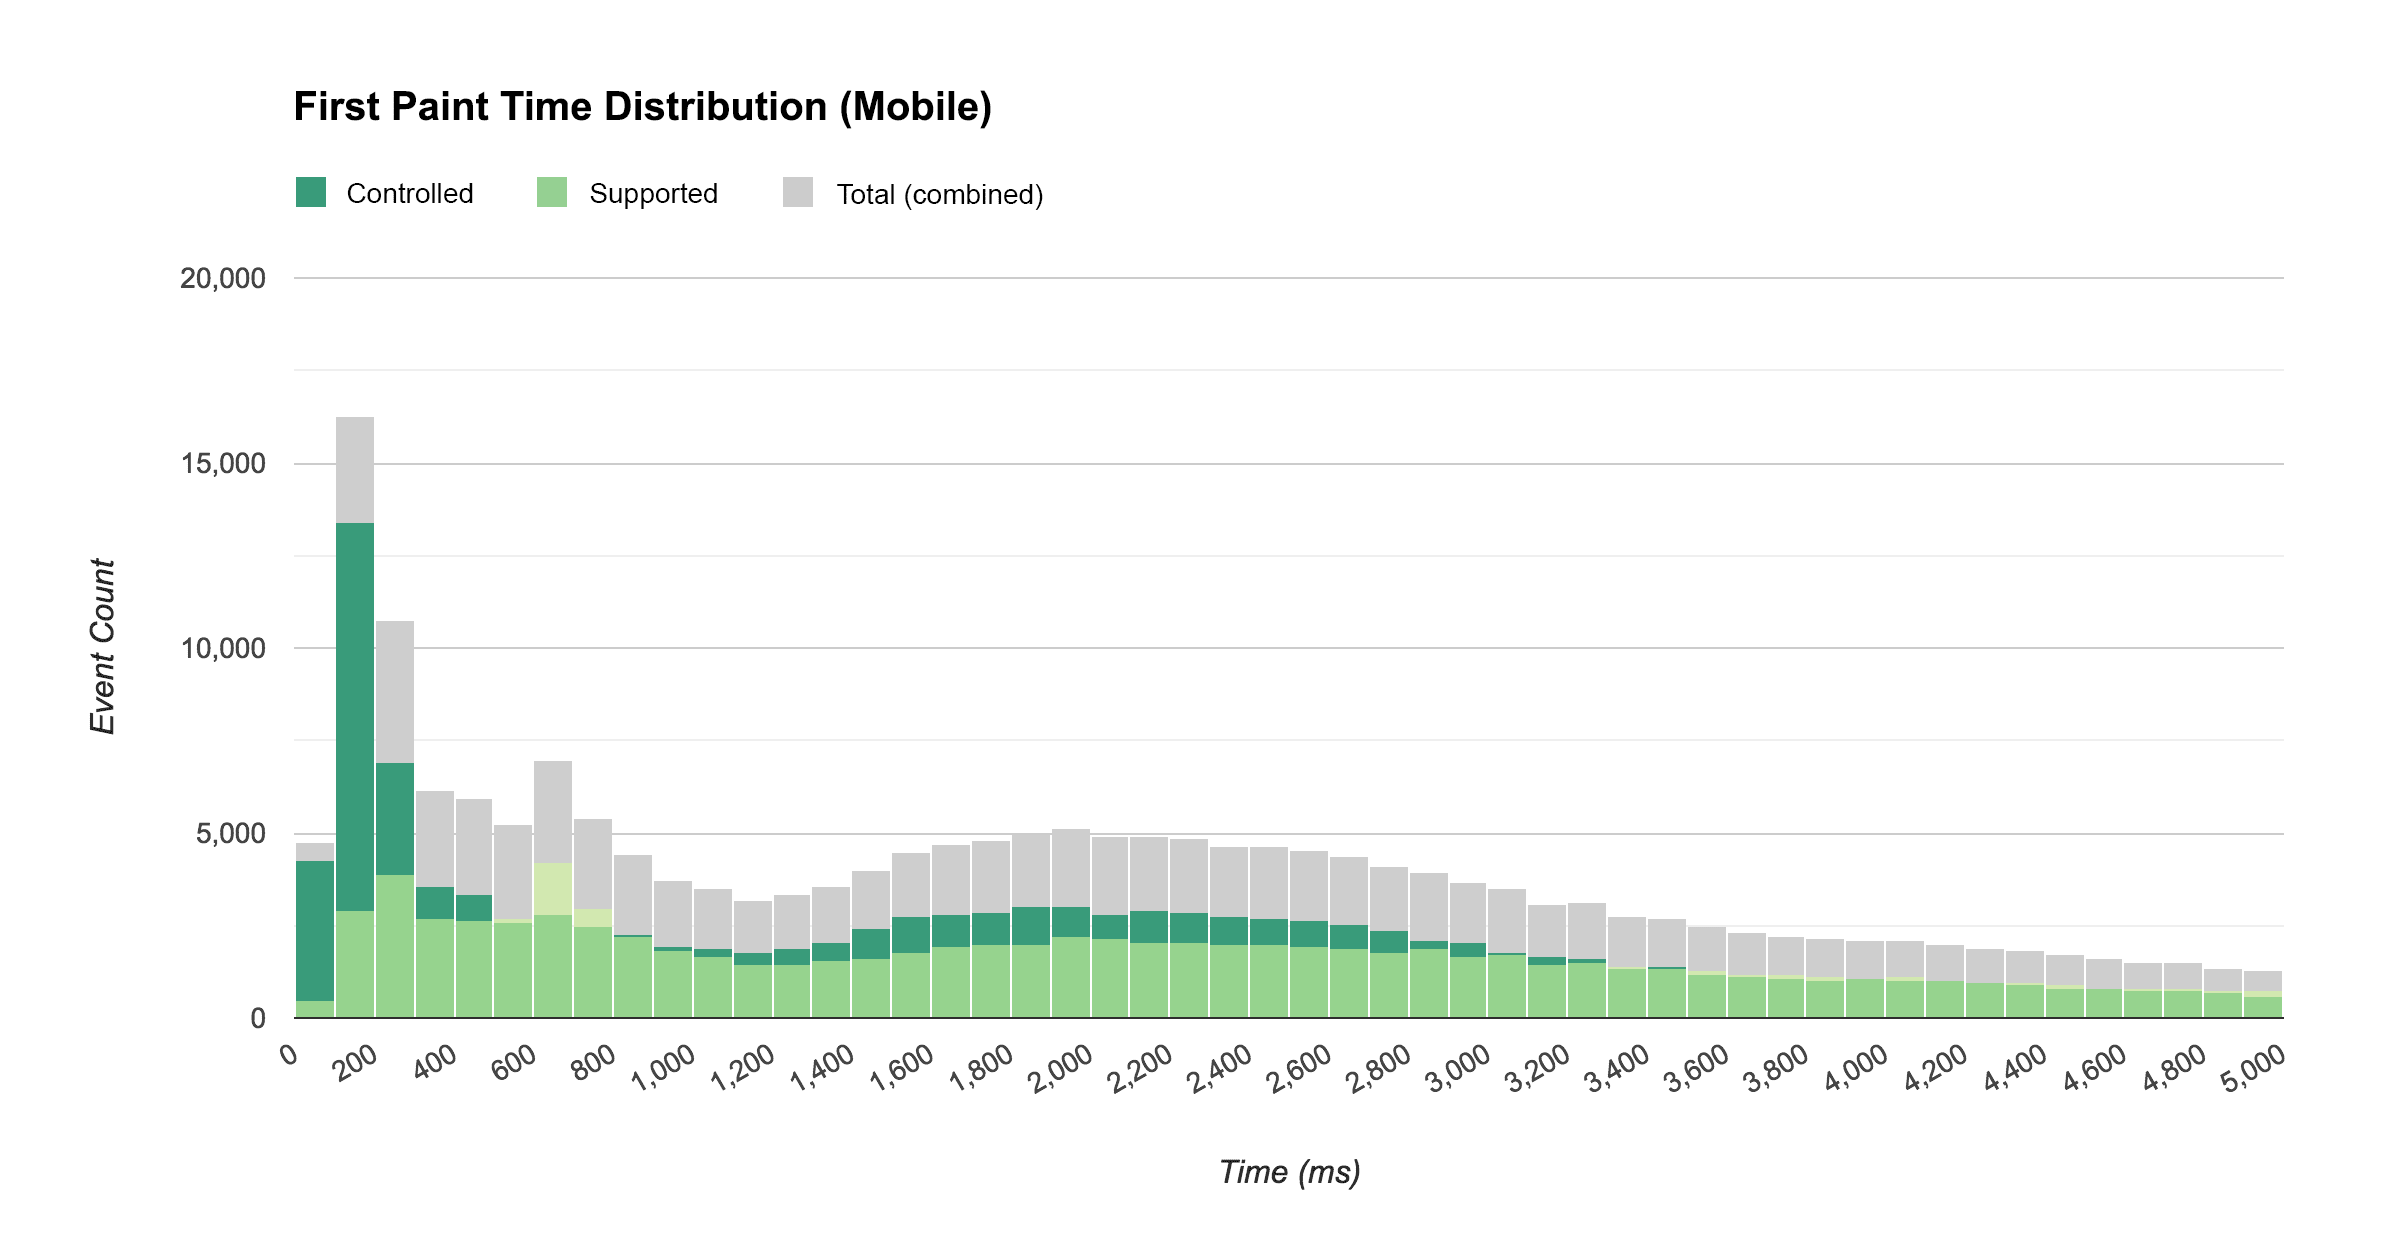 Time to first paint distribution on Mobile